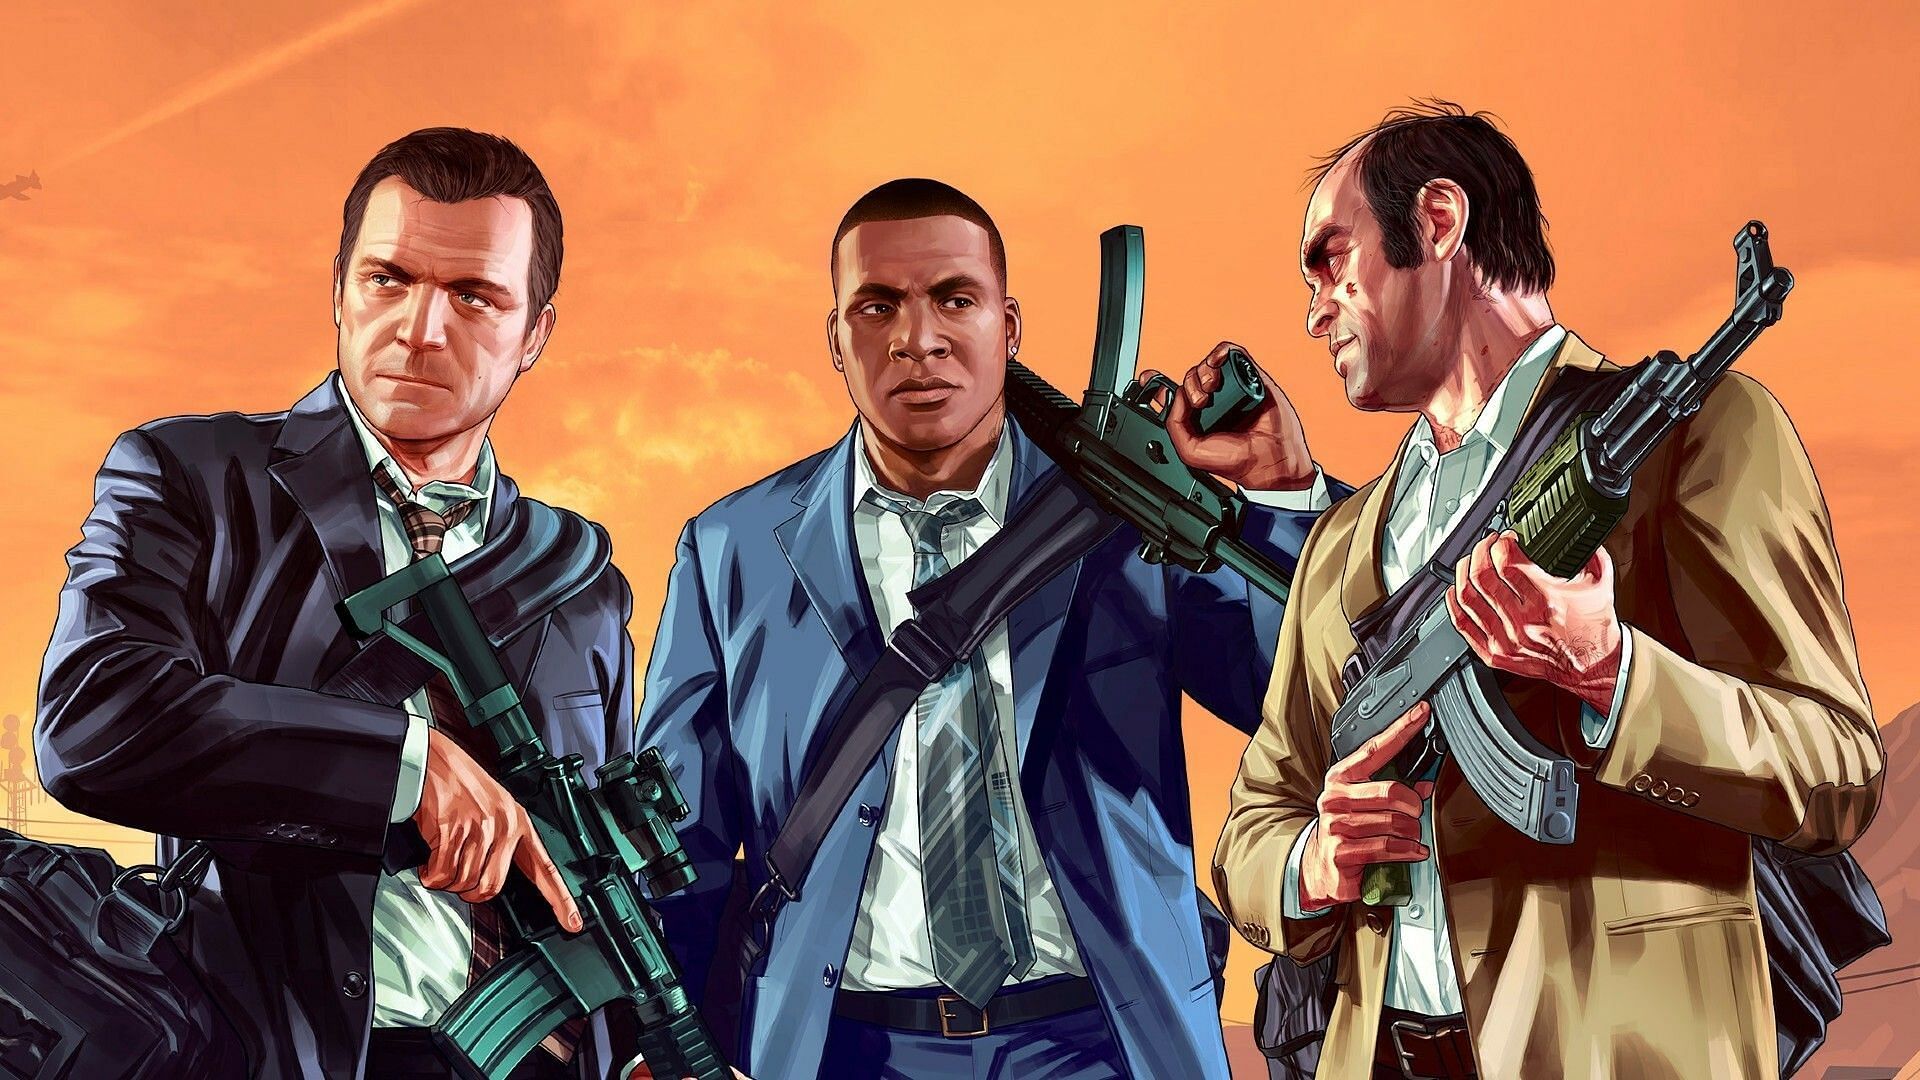 Why Option C (The Third Way) is the canon ending to GTA 5